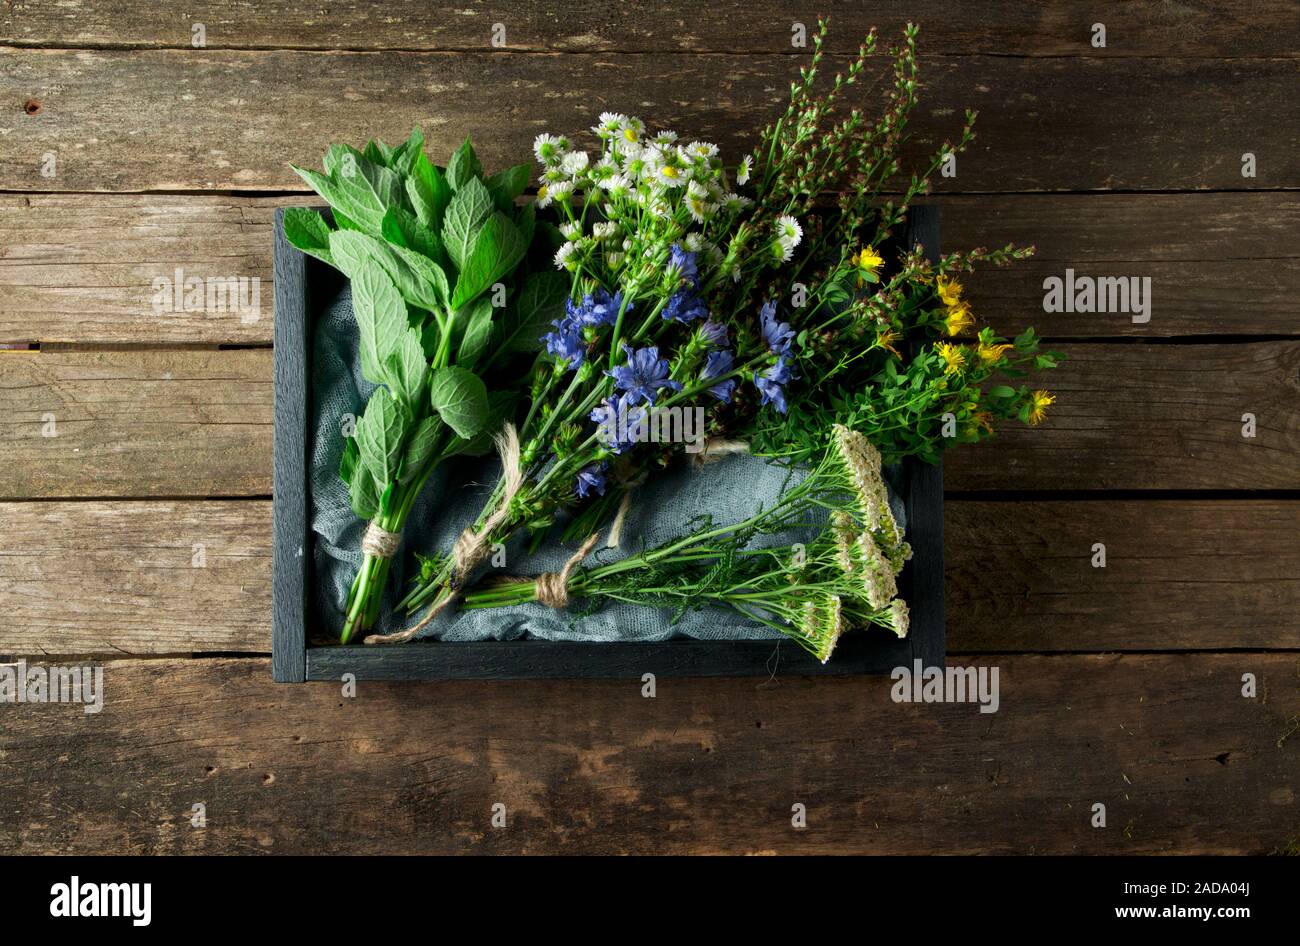 Fresh medicinal herbs. Medicinal herbs (chamomile, wormwood, yarrow, mint, St. John's wort and chicory) on an old wooden board. Stock Photo